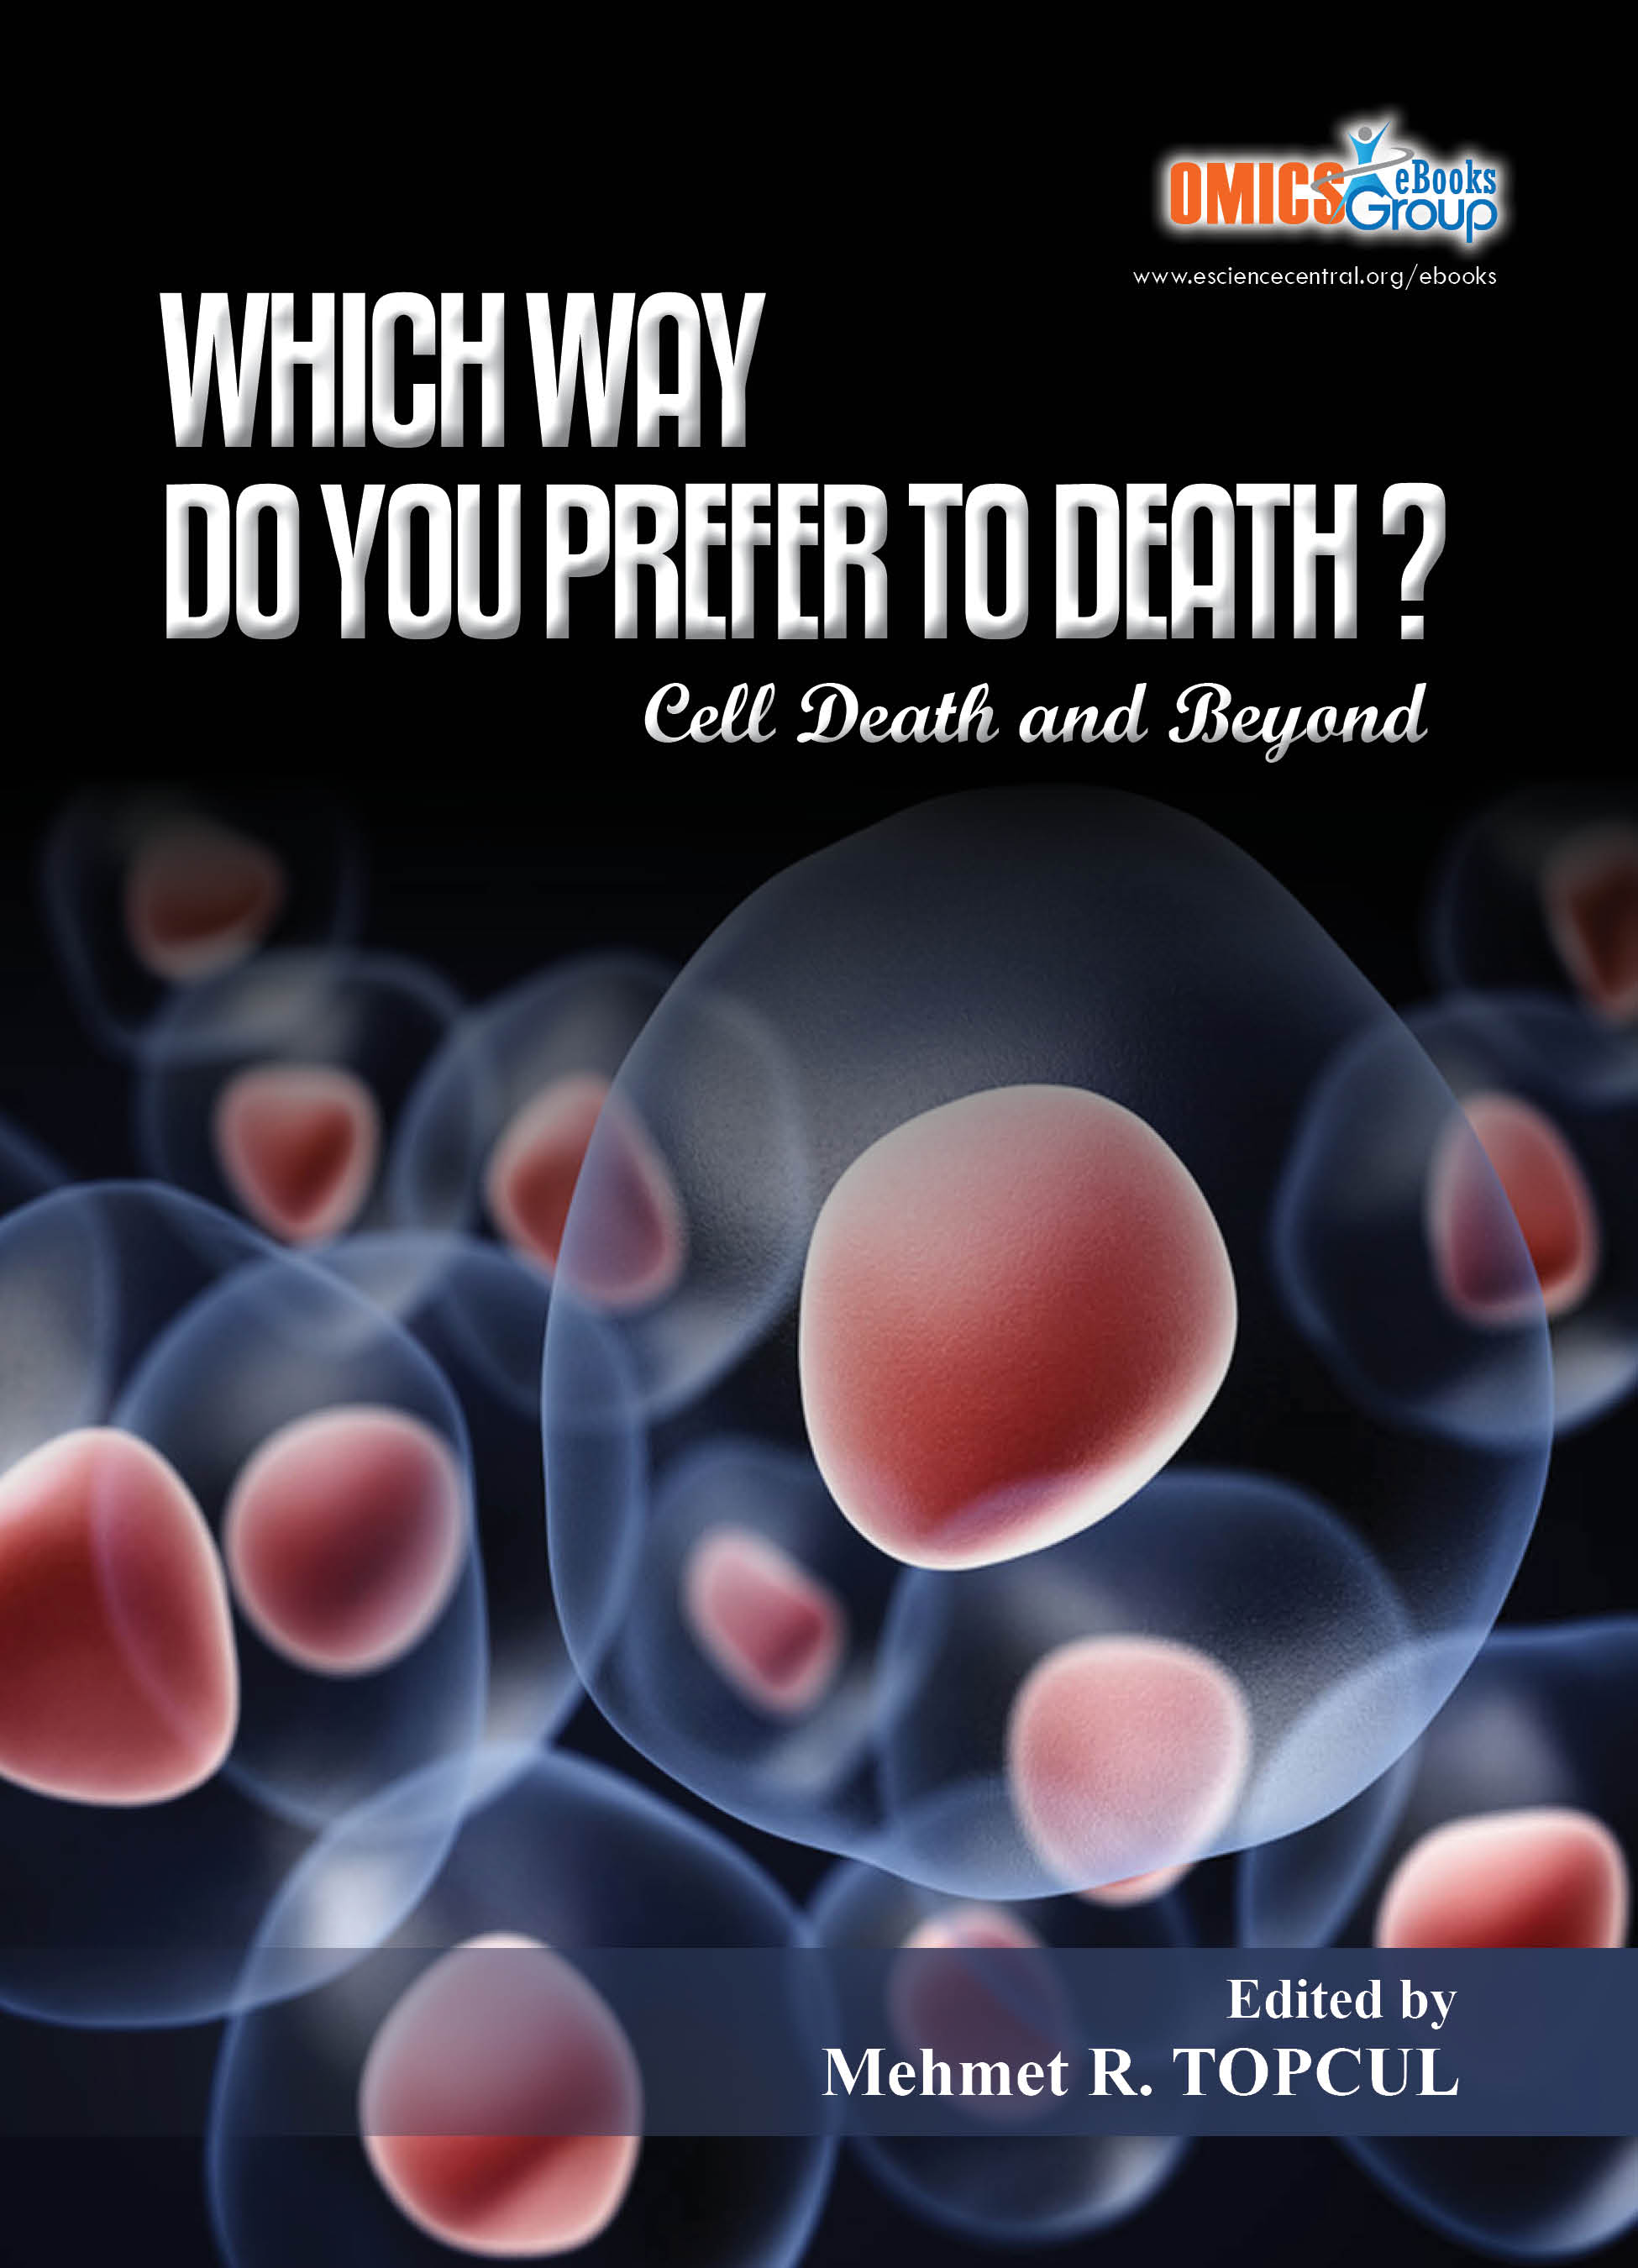 Which Way do you prefer to Death? Cell Death and Beyond